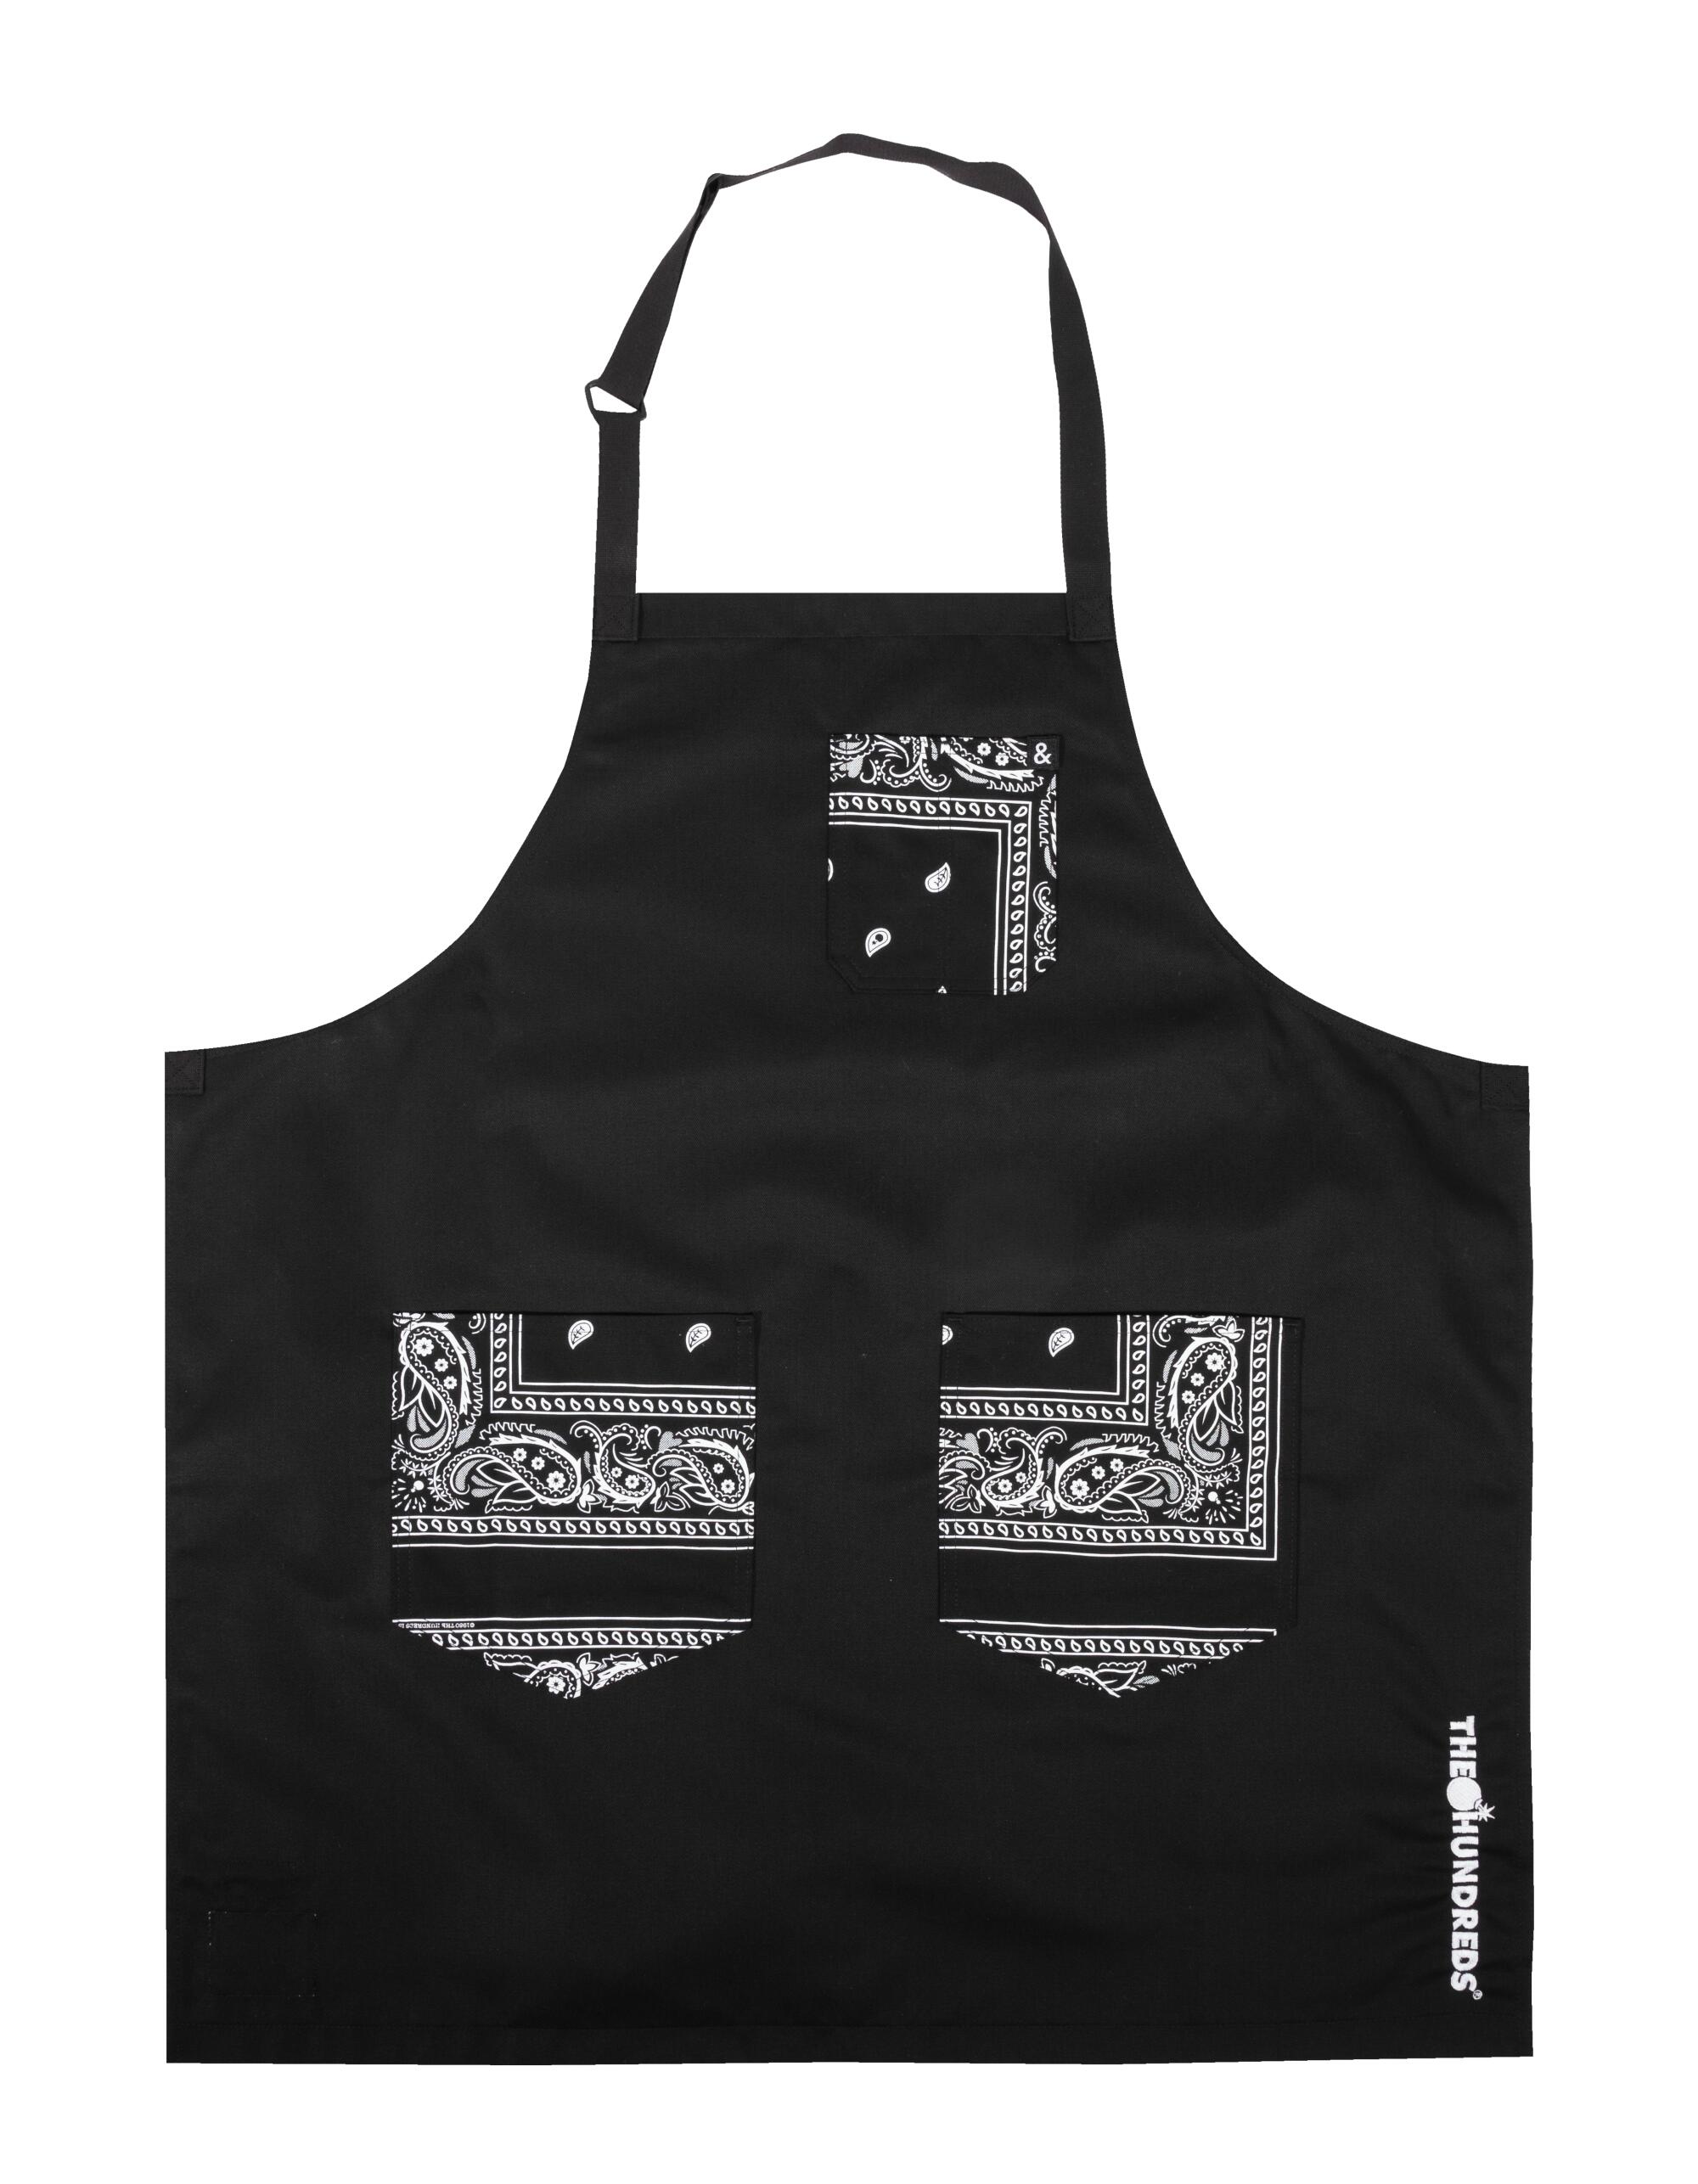 Black apron with abstract patterning